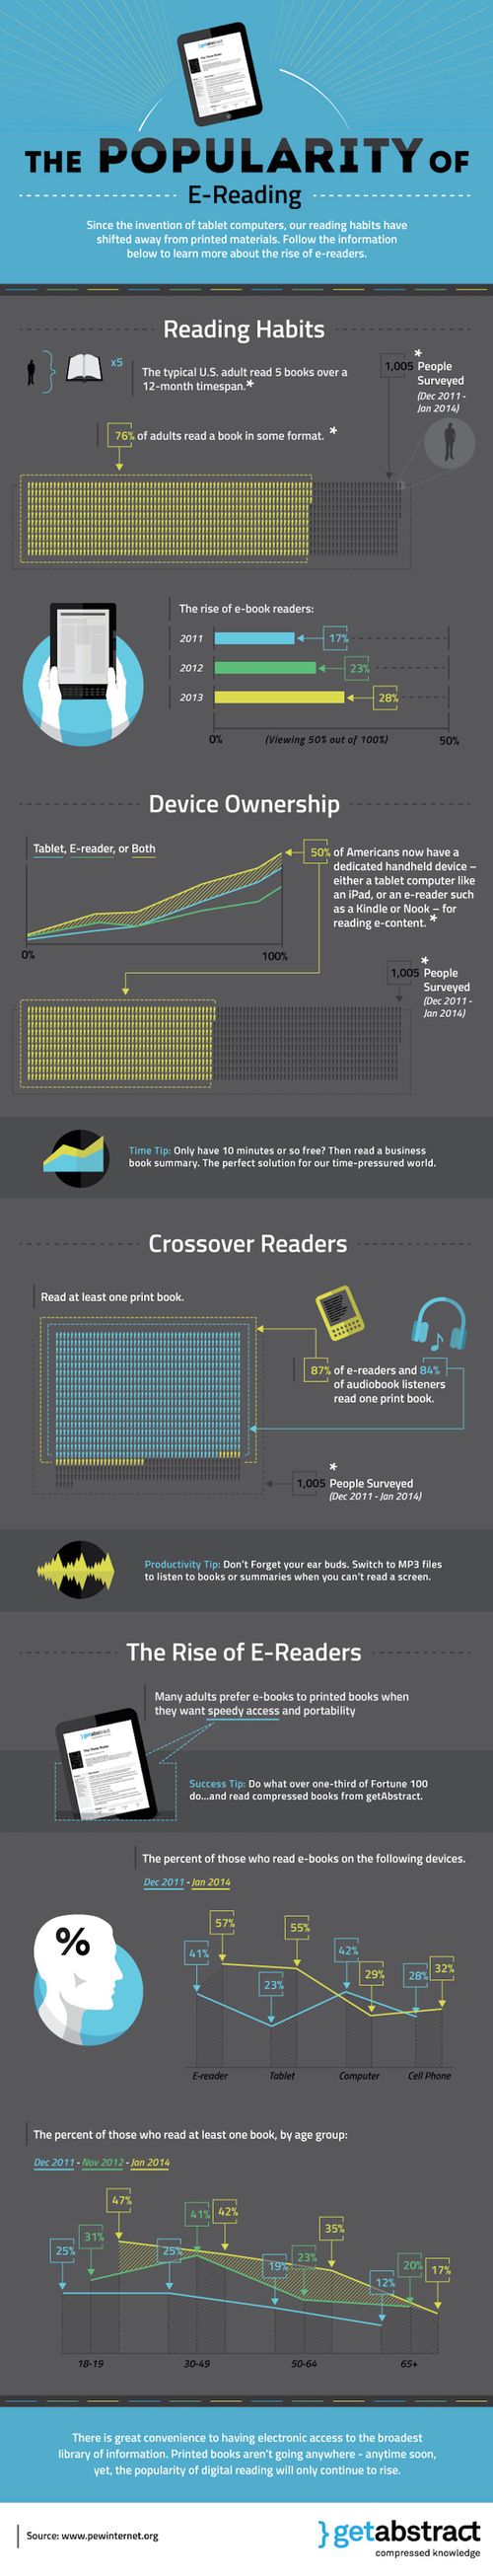 The-growing-popularity-of-e-reading-infographic-840x4387